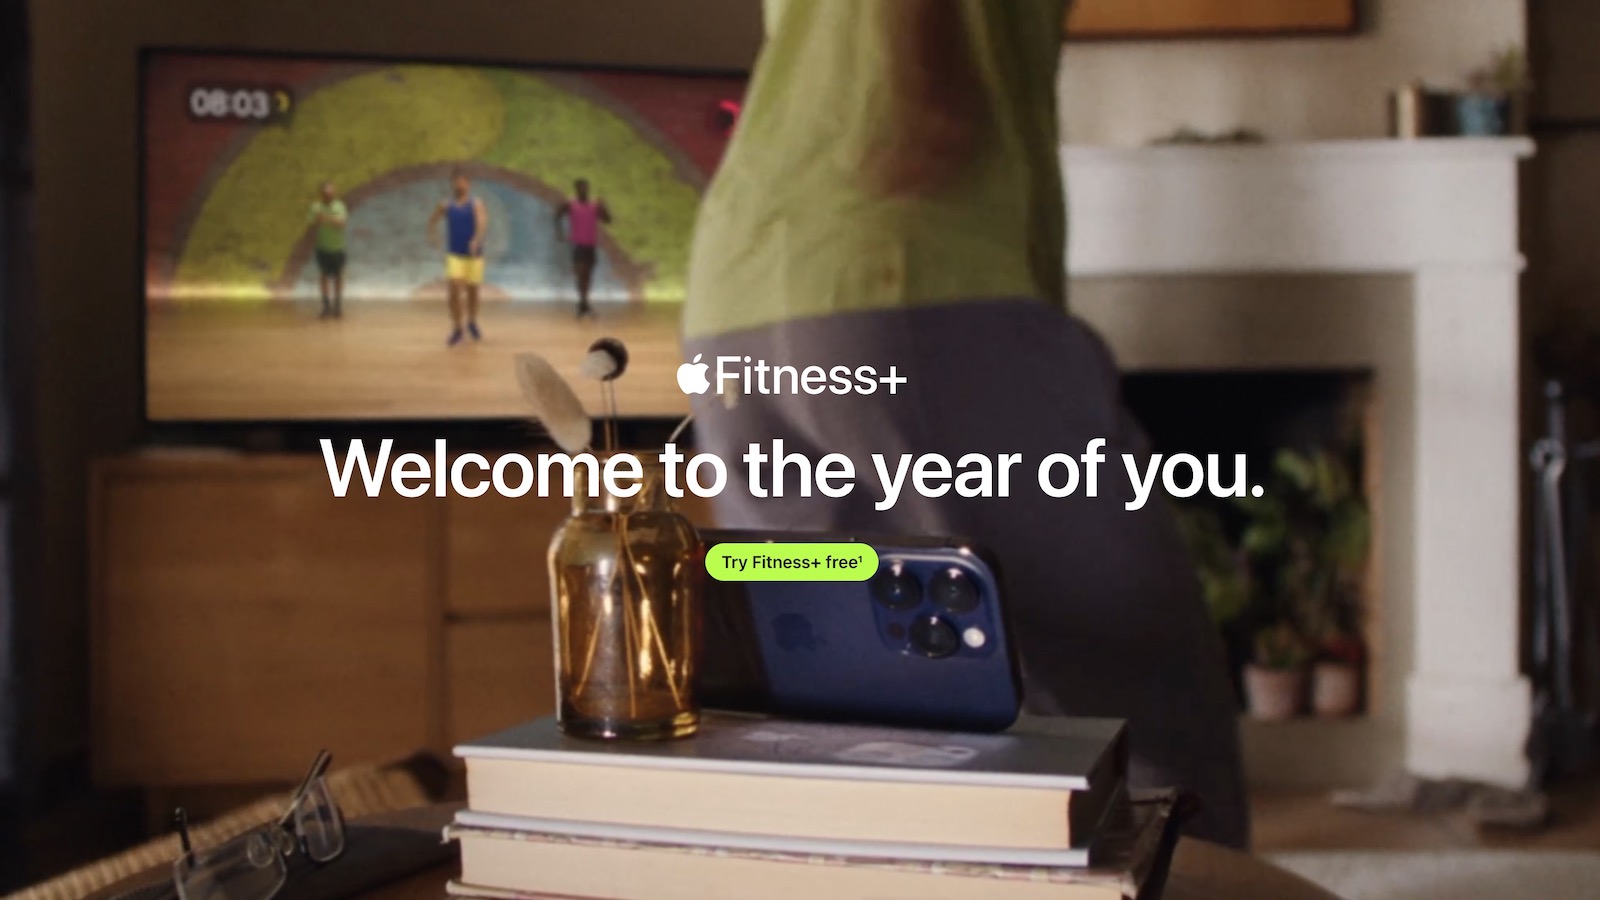 Apple Fitness+ Takes Over Apple’s Home Page to Help You Reach Your New Year’s Goals